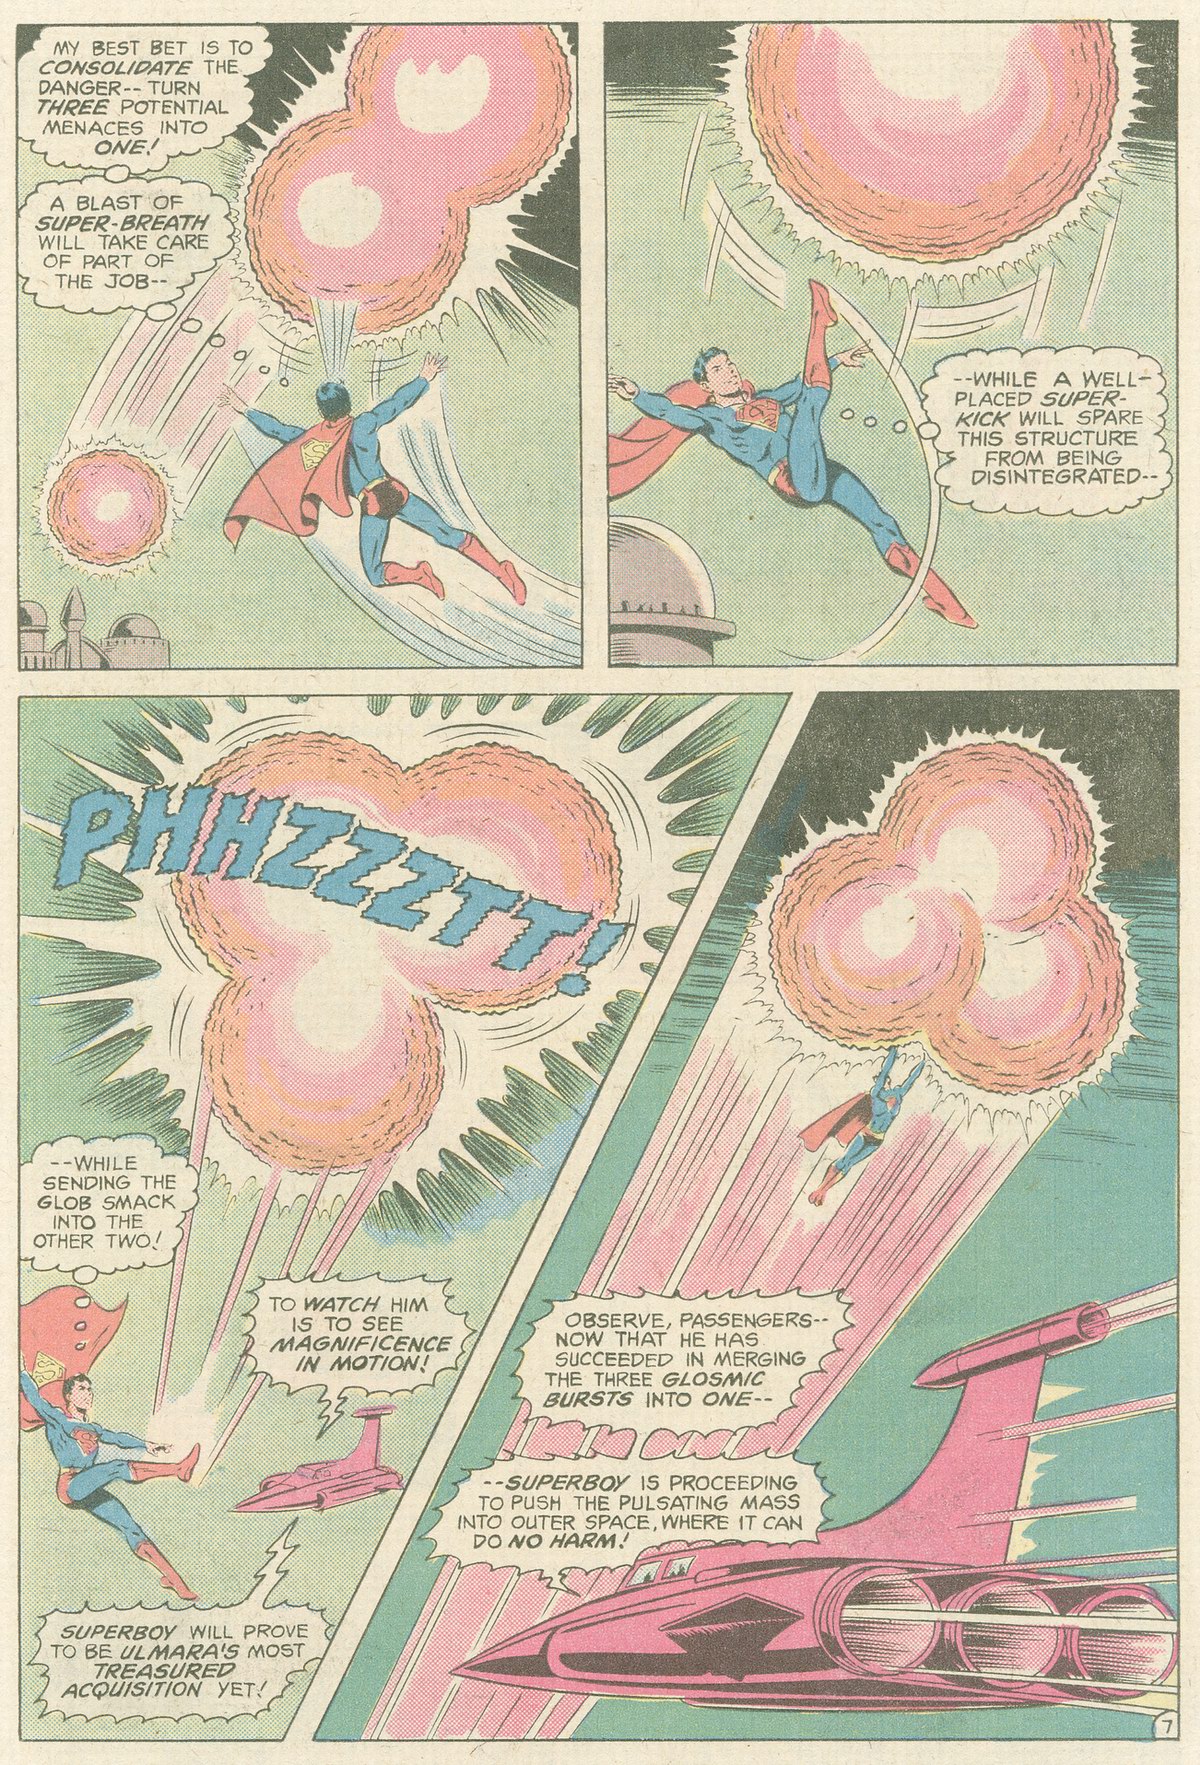 The New Adventures of Superboy 20 Page 7